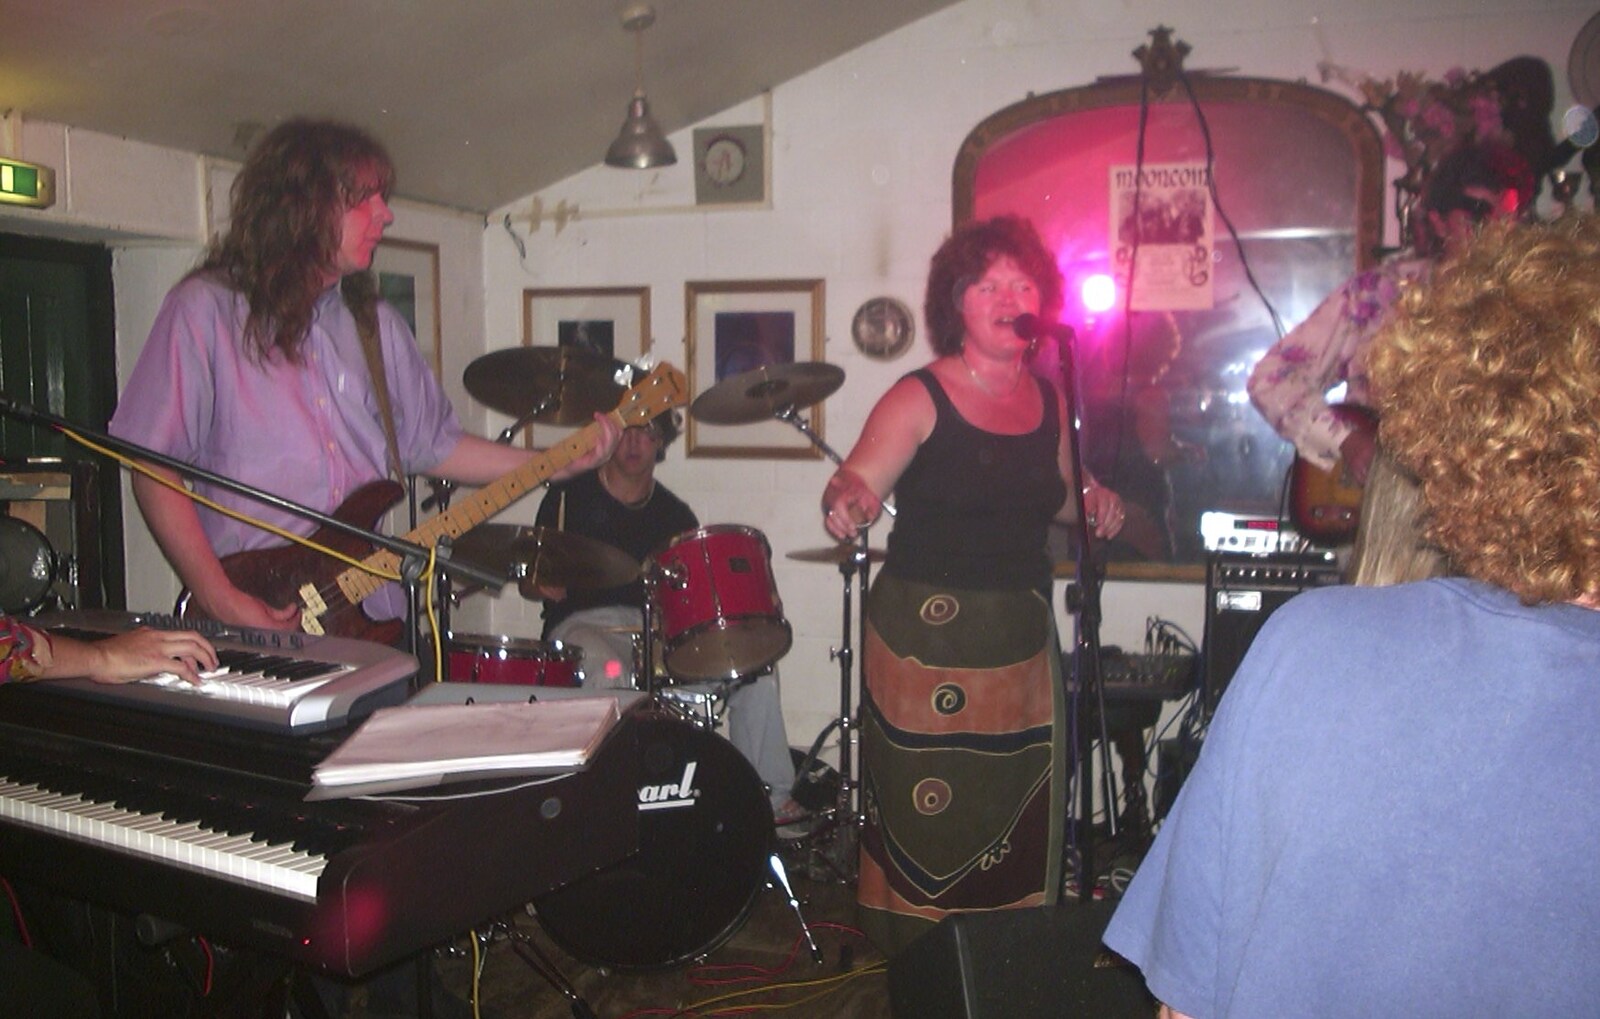 Longview and The BBs, Norwich and Banham, Norfolk - 4th July 2003: The BBs, with Max on bass